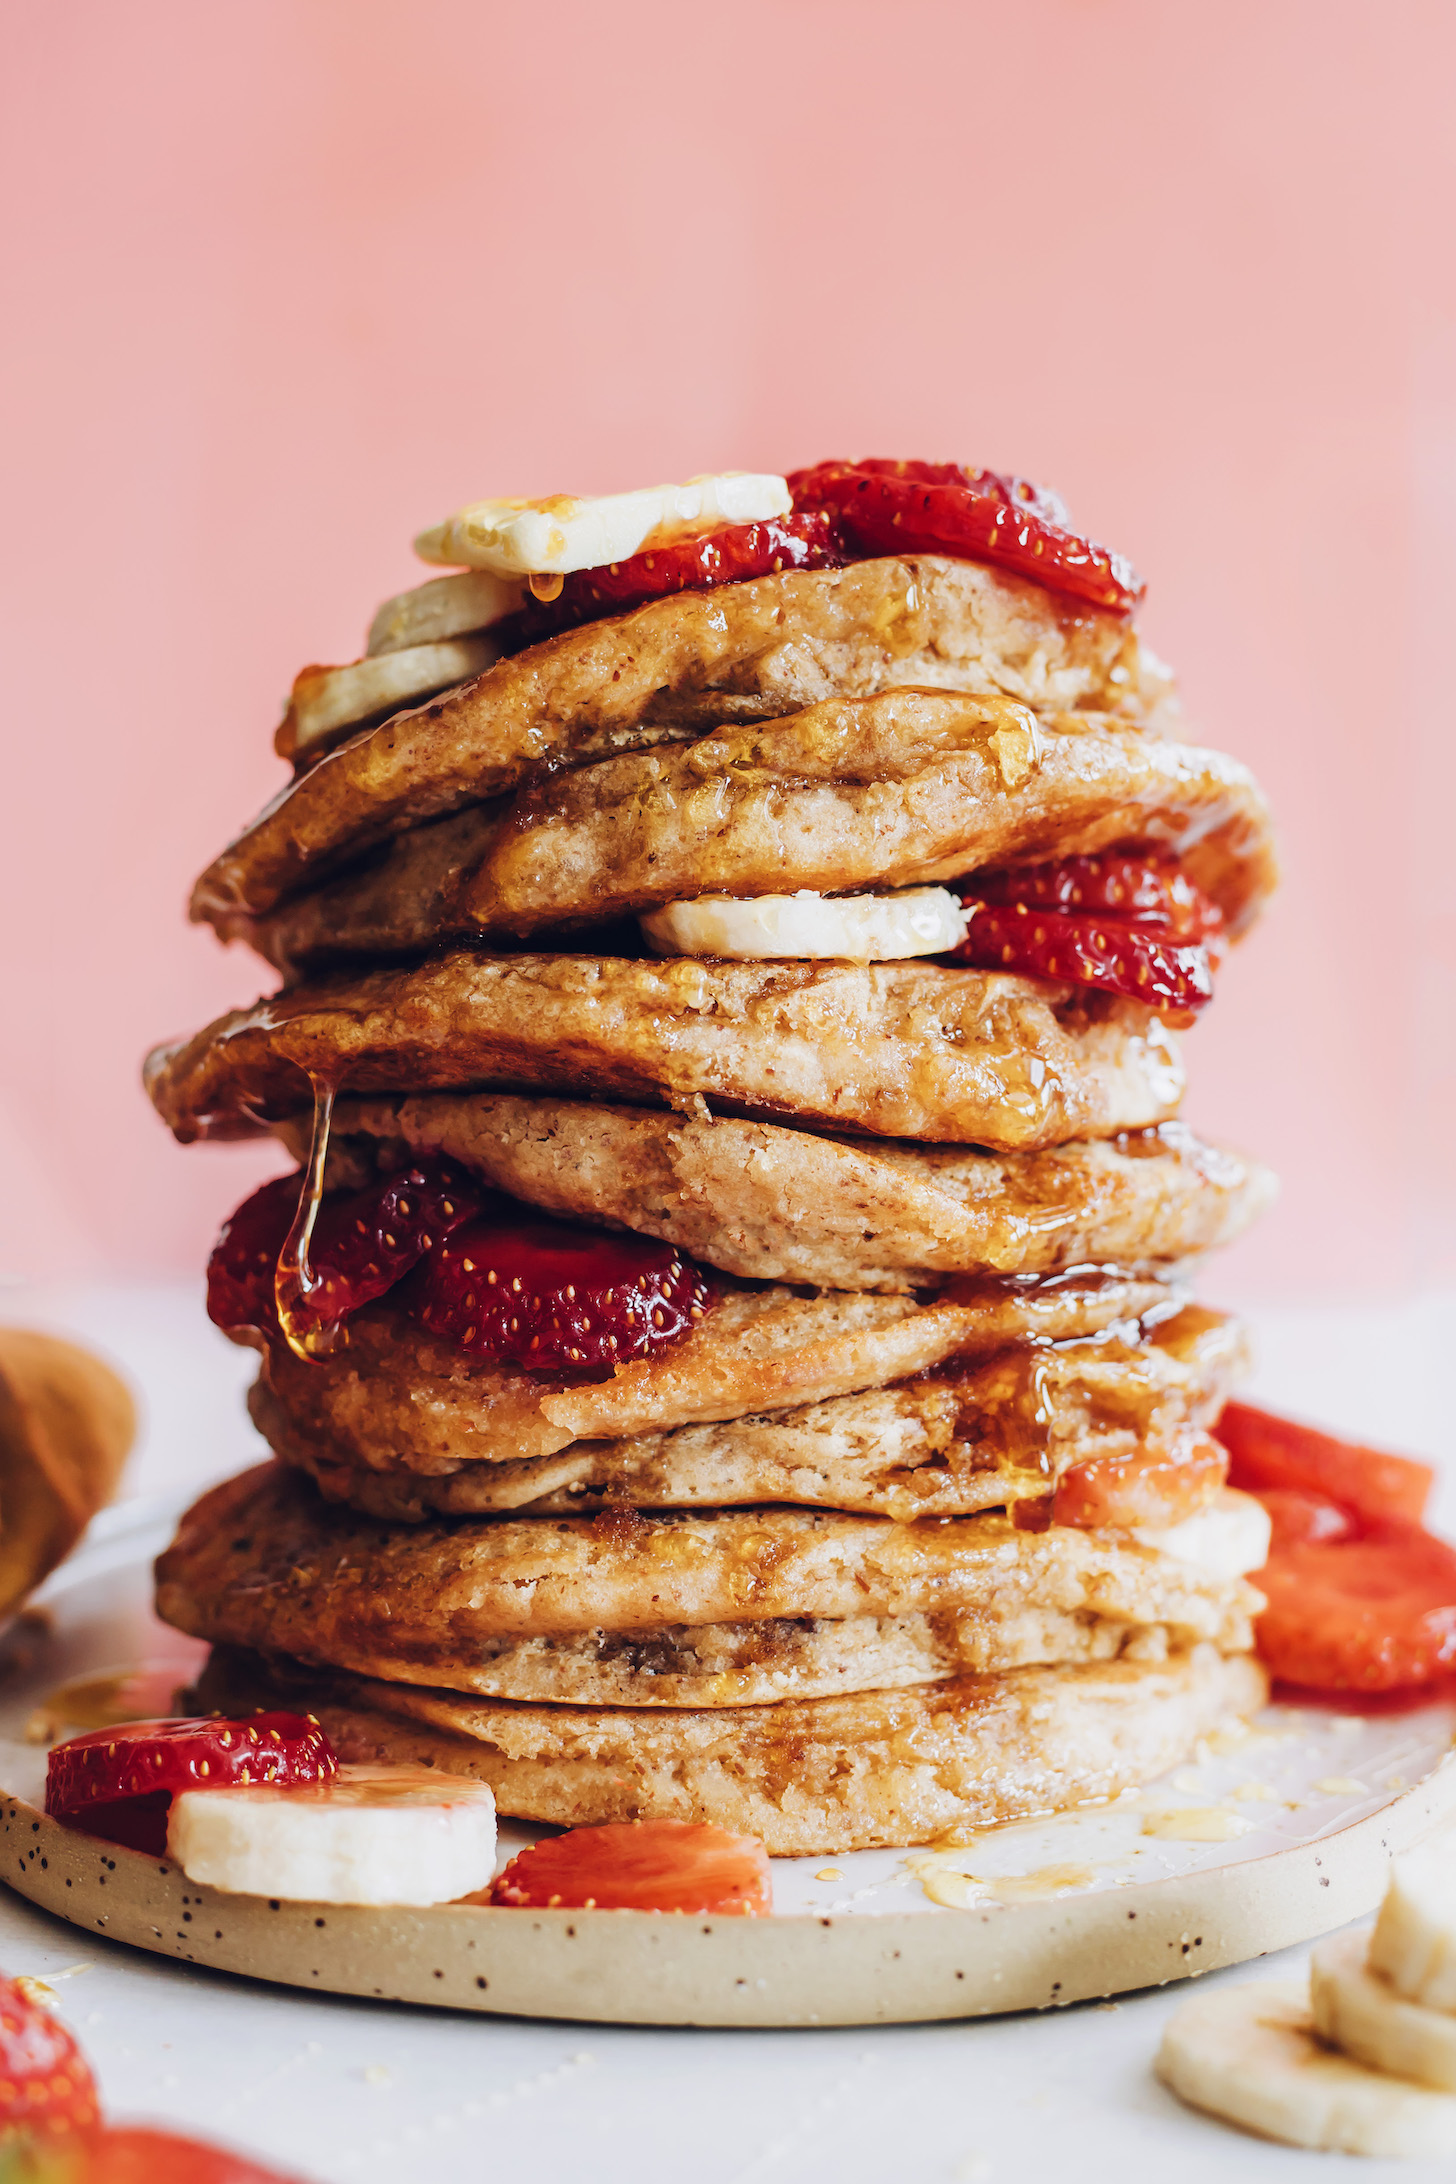 Stack of gluten-free pancakes topped with fresh fruit and maple syrup